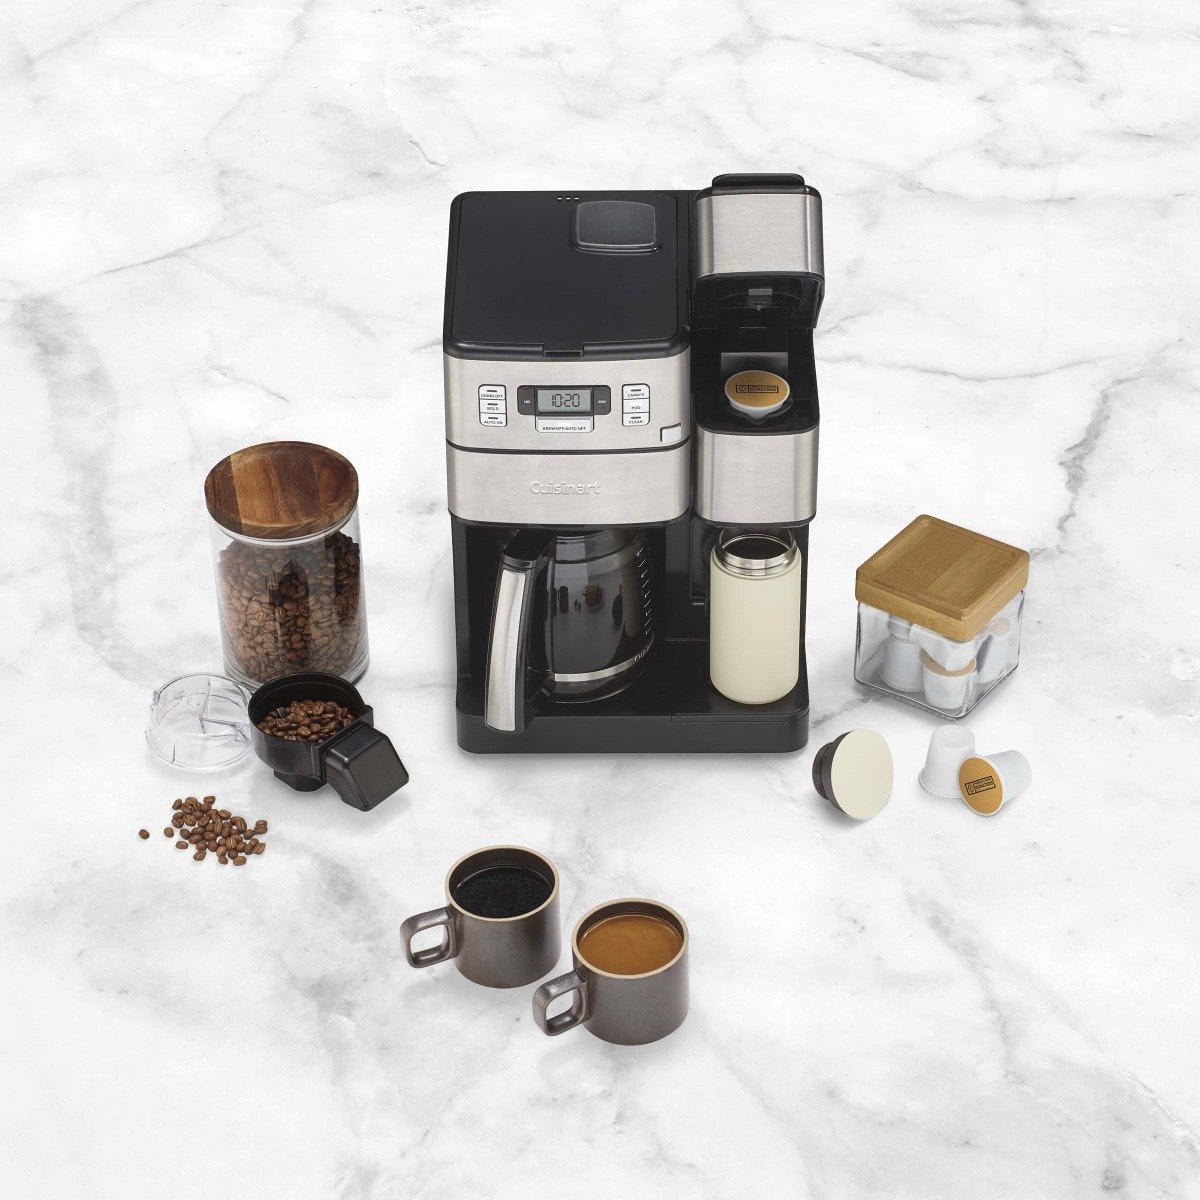 Cuisinart SS-GB1 Coffee Center Grind and Brew Plus, Built-in Coffee  Grinder, Coffeemaker and Single-Serve Brewer with 6oz, 8oz and 10oz Serving  Size